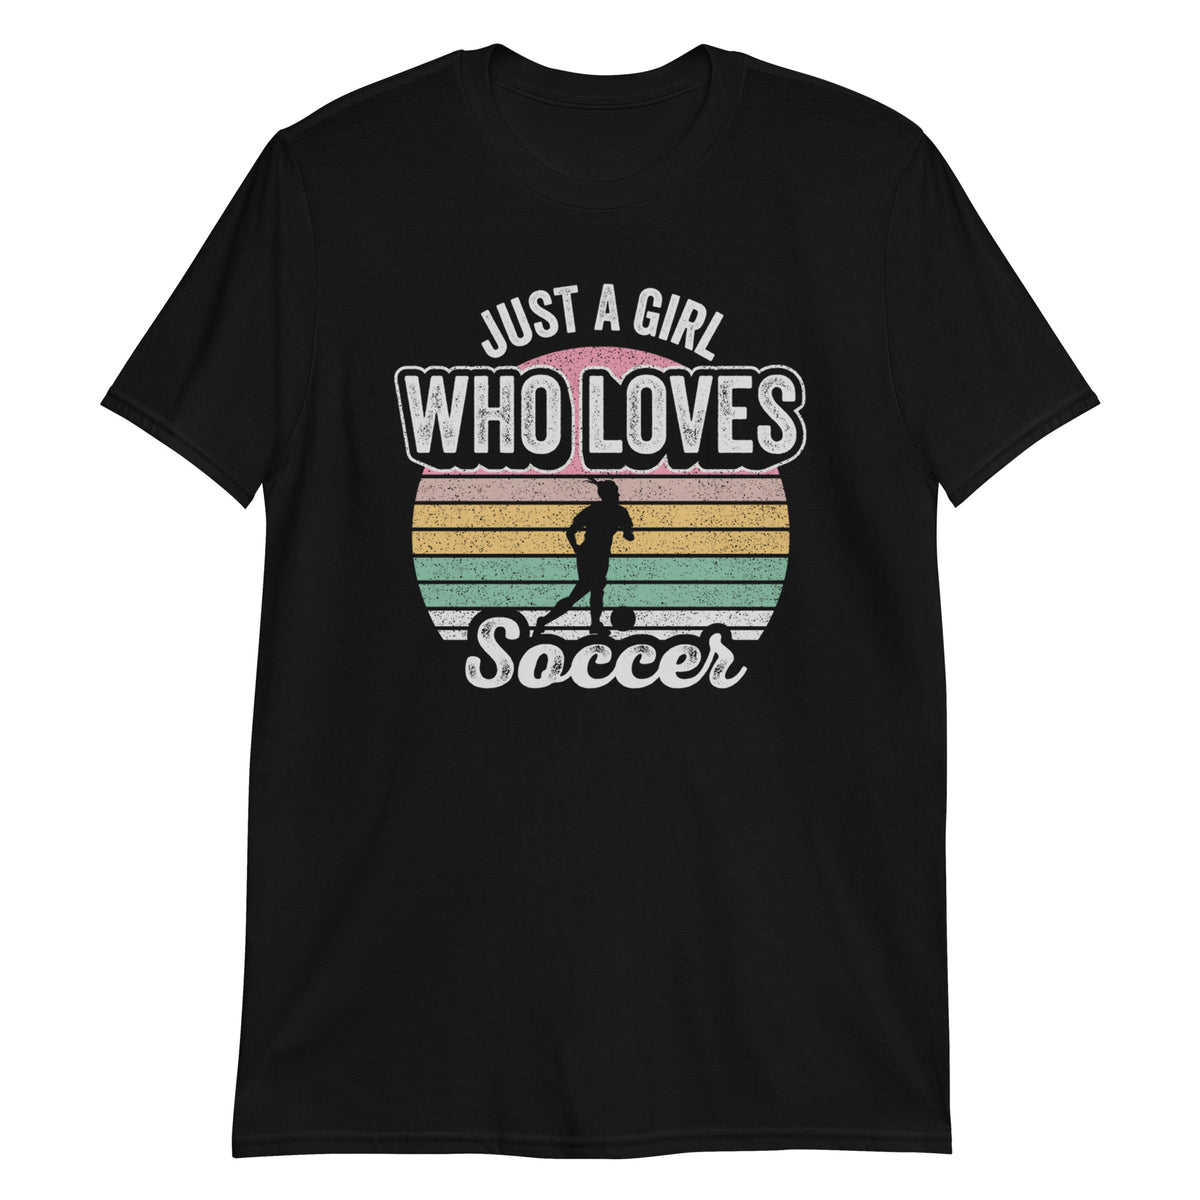 Just a Girl Who Loves Soccer T-Shirt